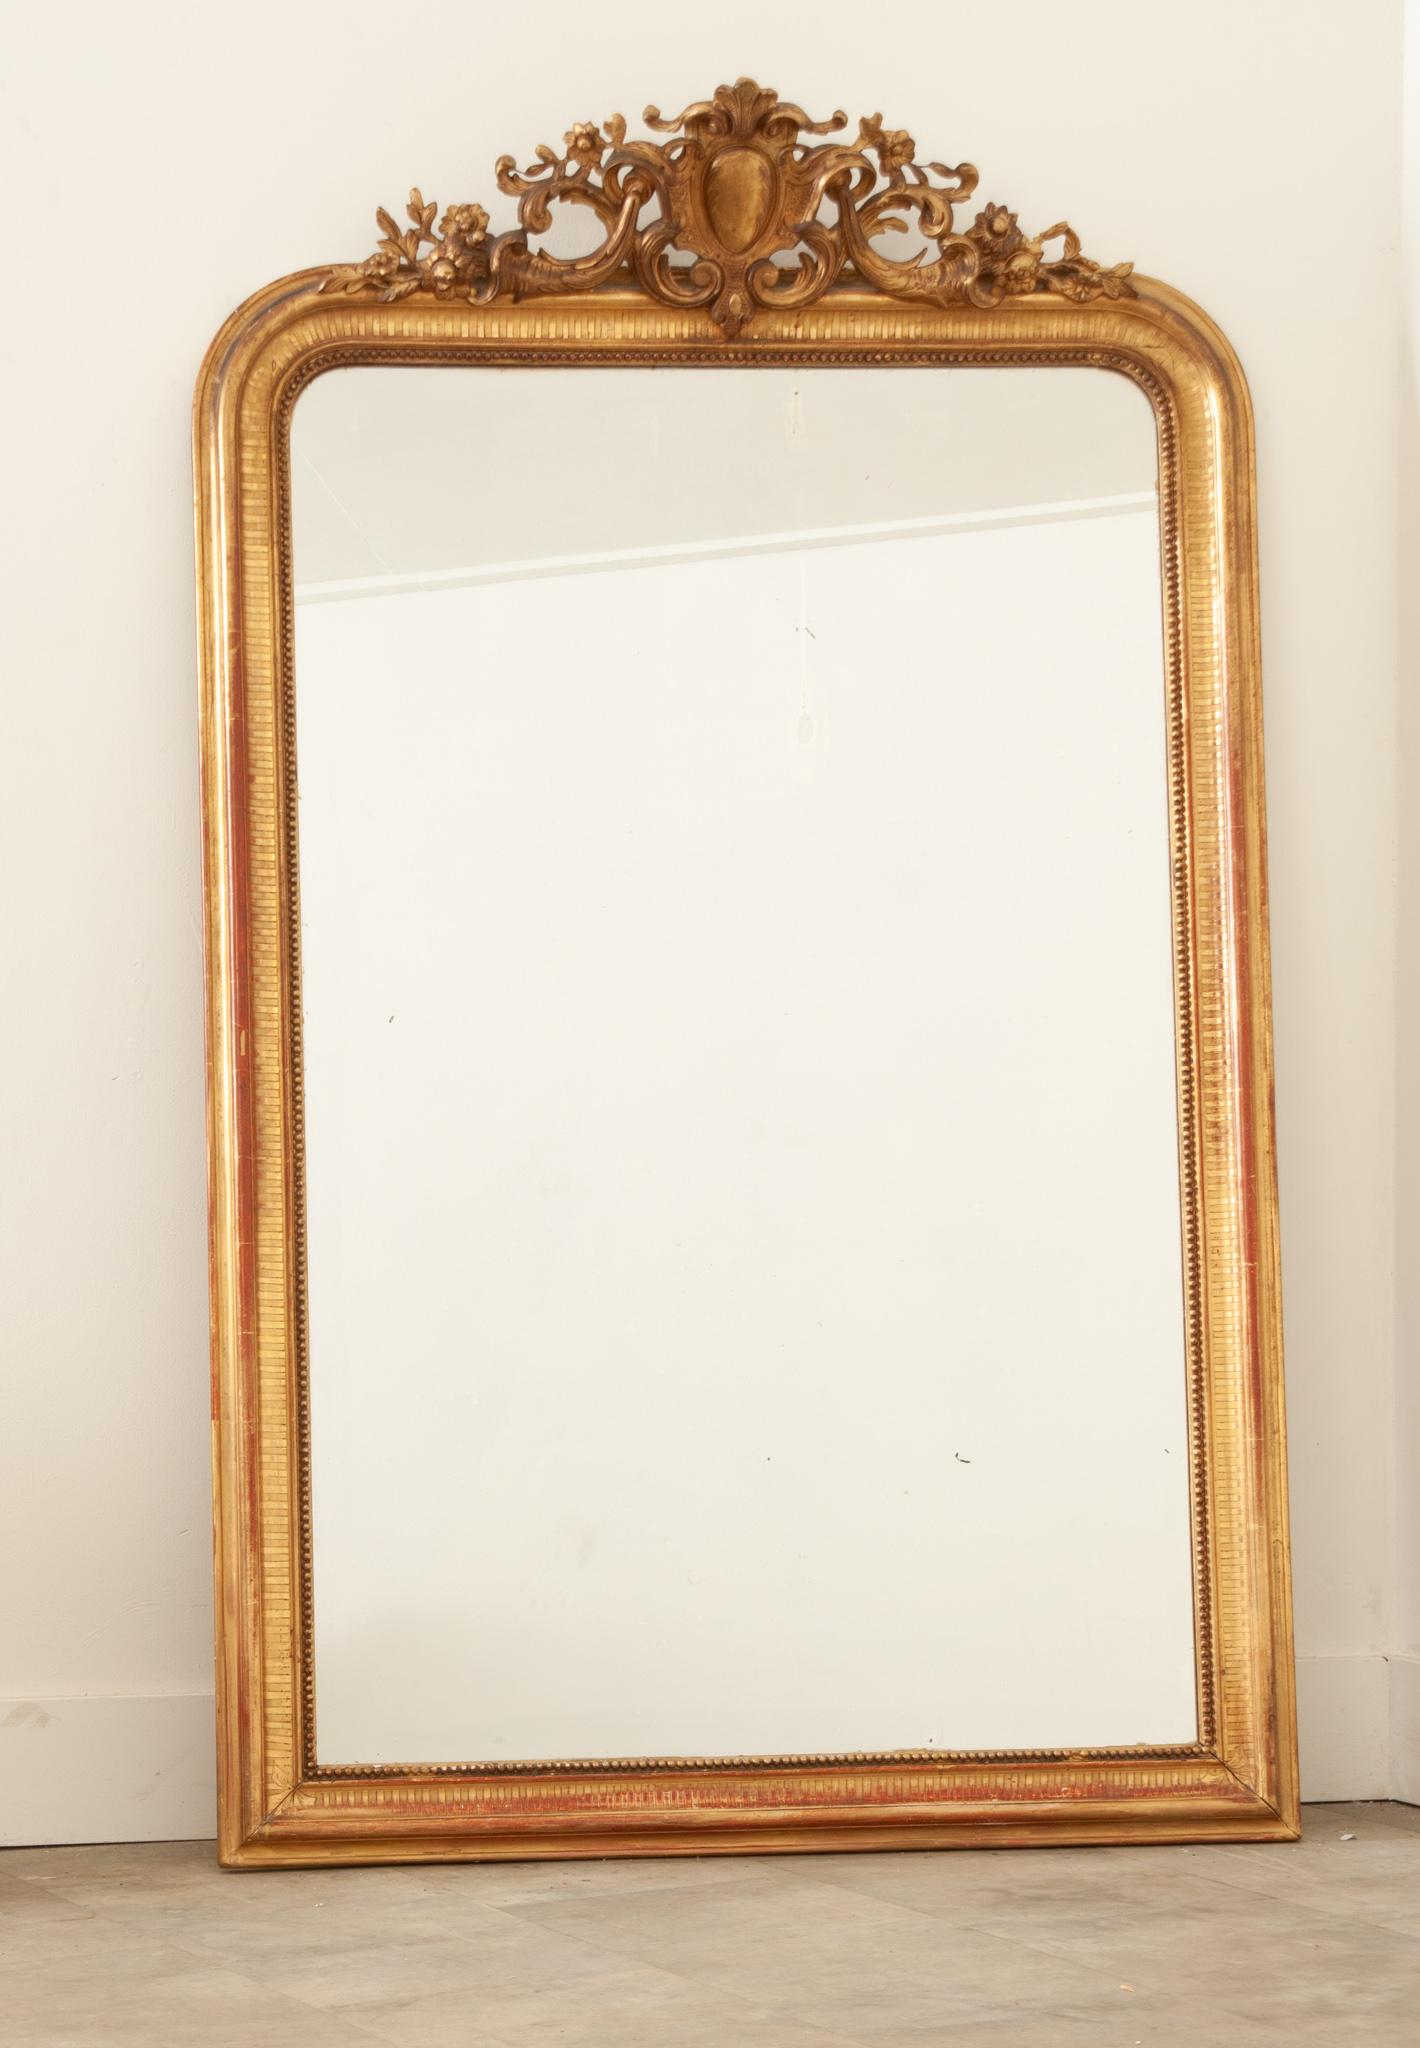 A striking Louis XVI style gold gilt mirror hand-crafted in France in the 19th century. This elegant mirror boasts the original mirror glass, still beautiful and showing signs of foxing and a few marks. The hand-carved frame is topped with an ornate